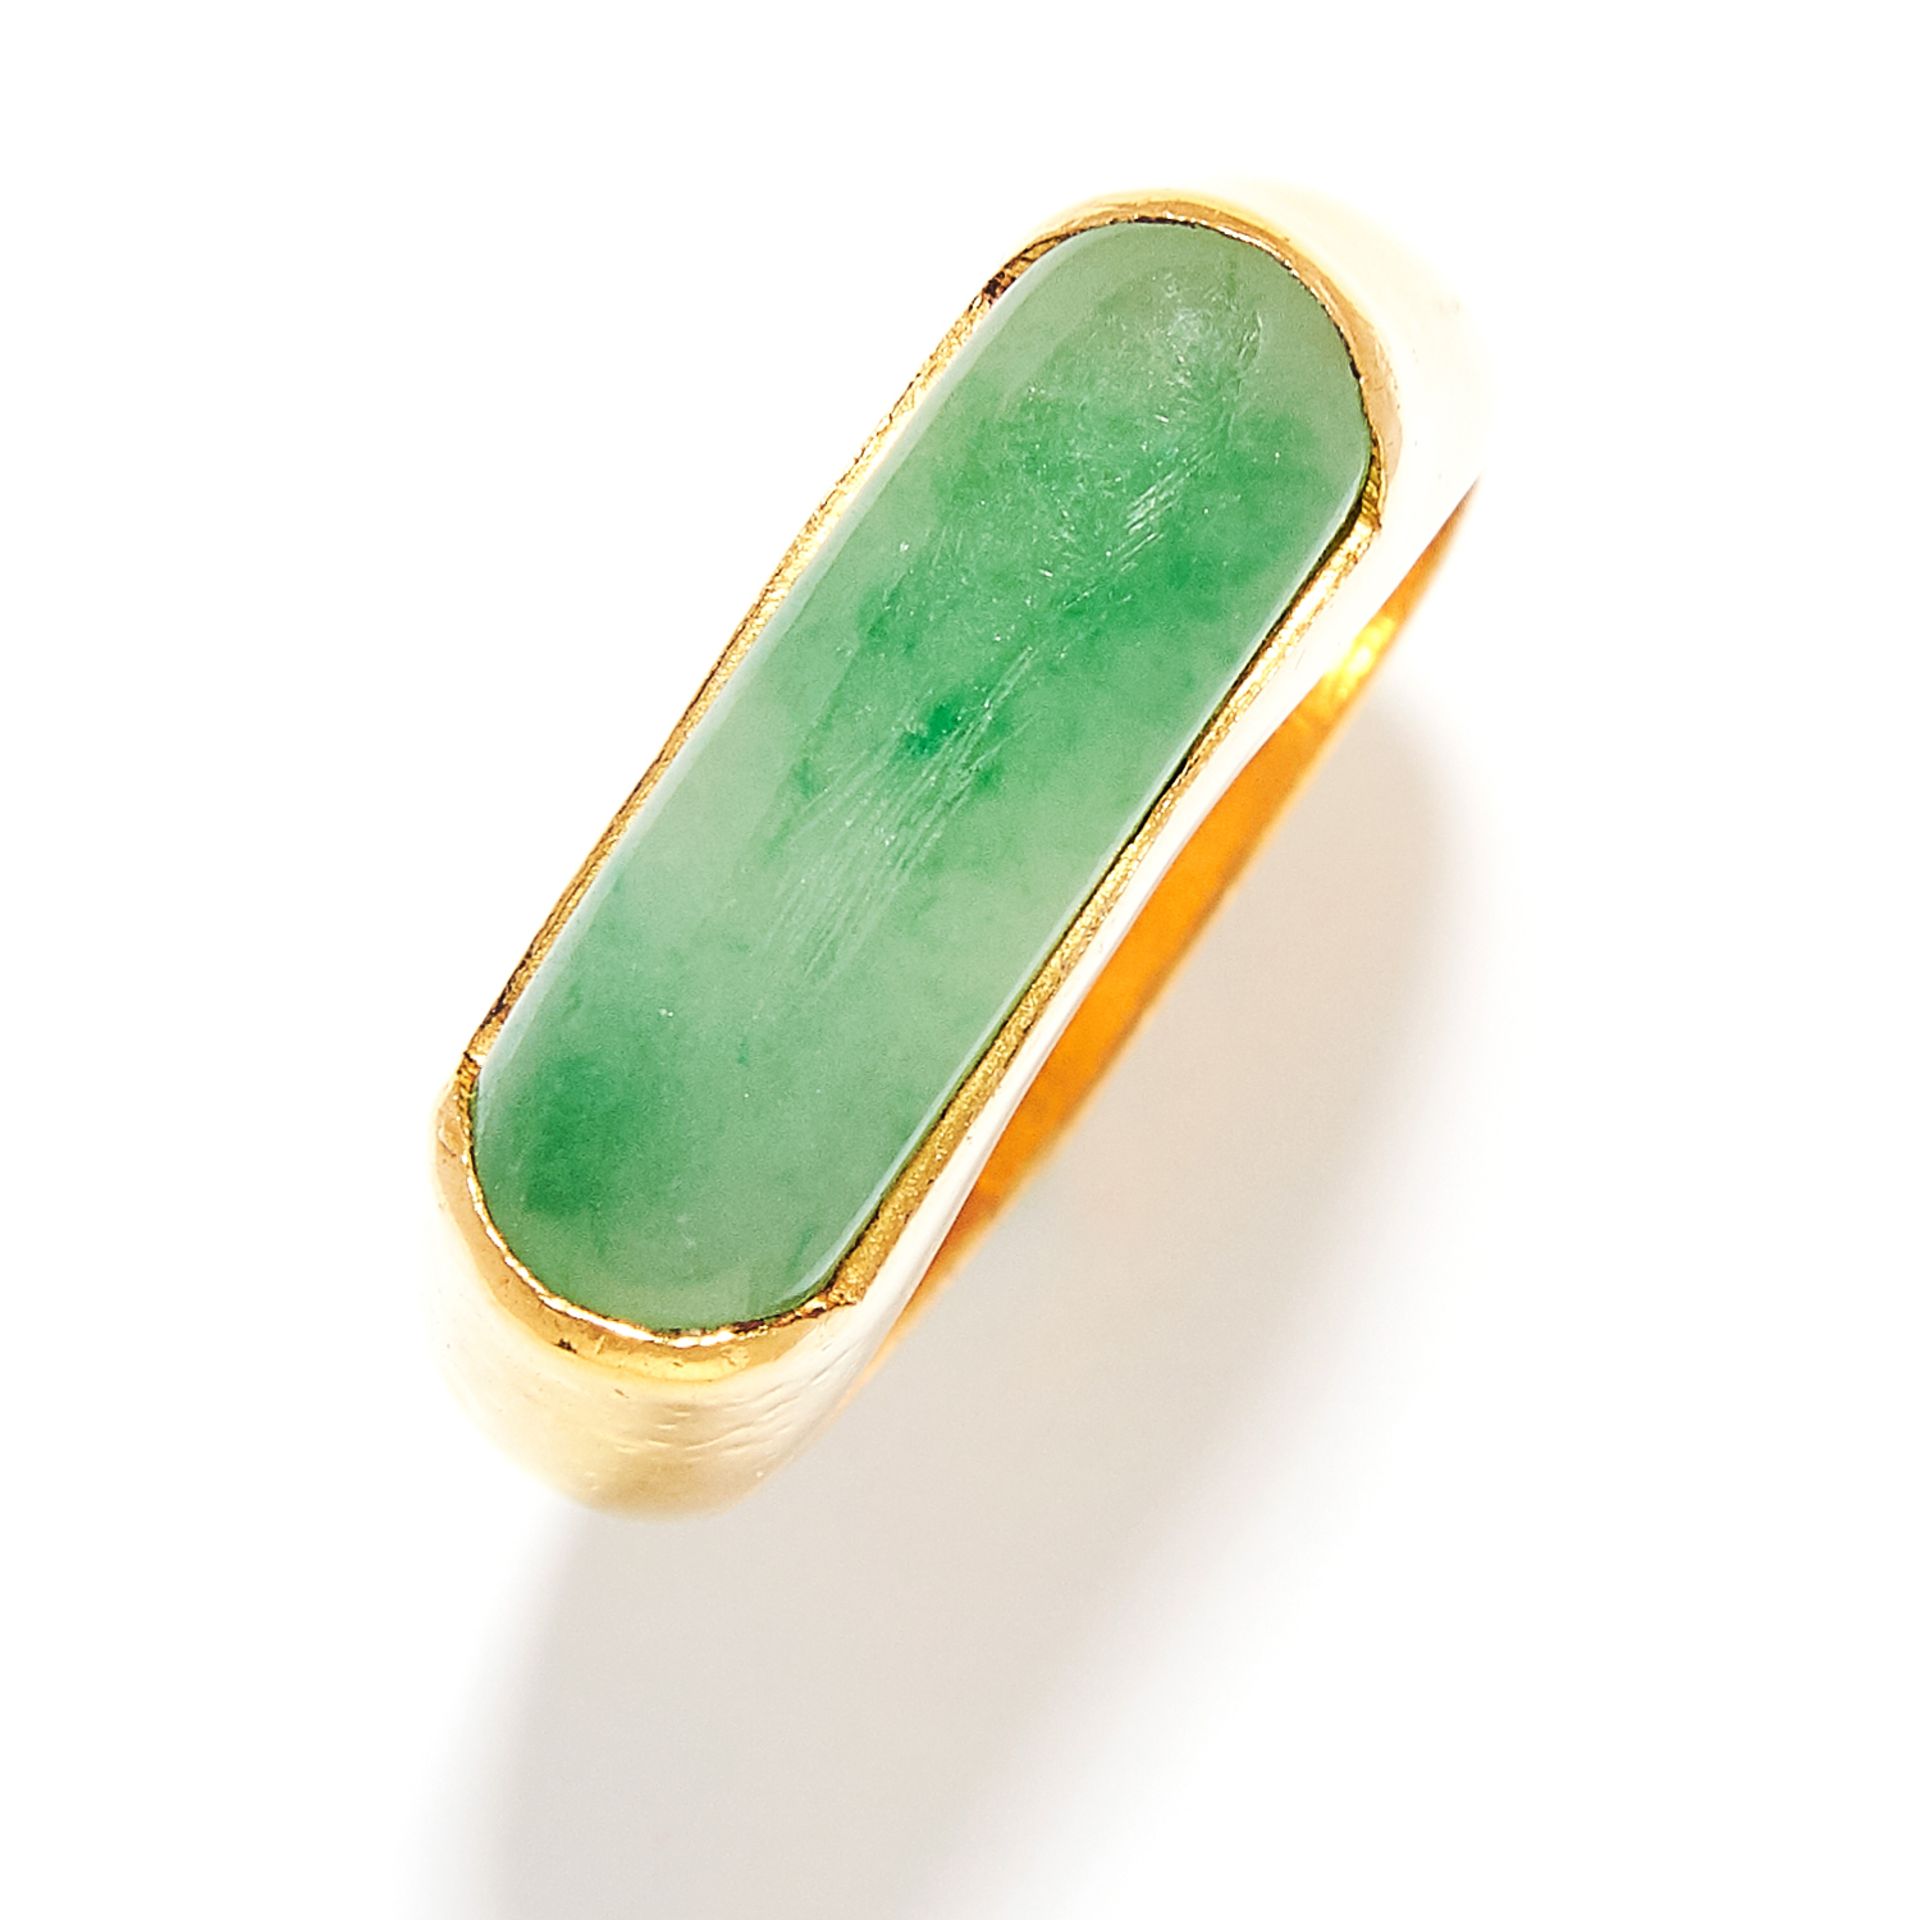 CHINESE JADEITE JADE AND DIAMOND RING in 14ct yellow gold, the oval jade cabochon punctuated by